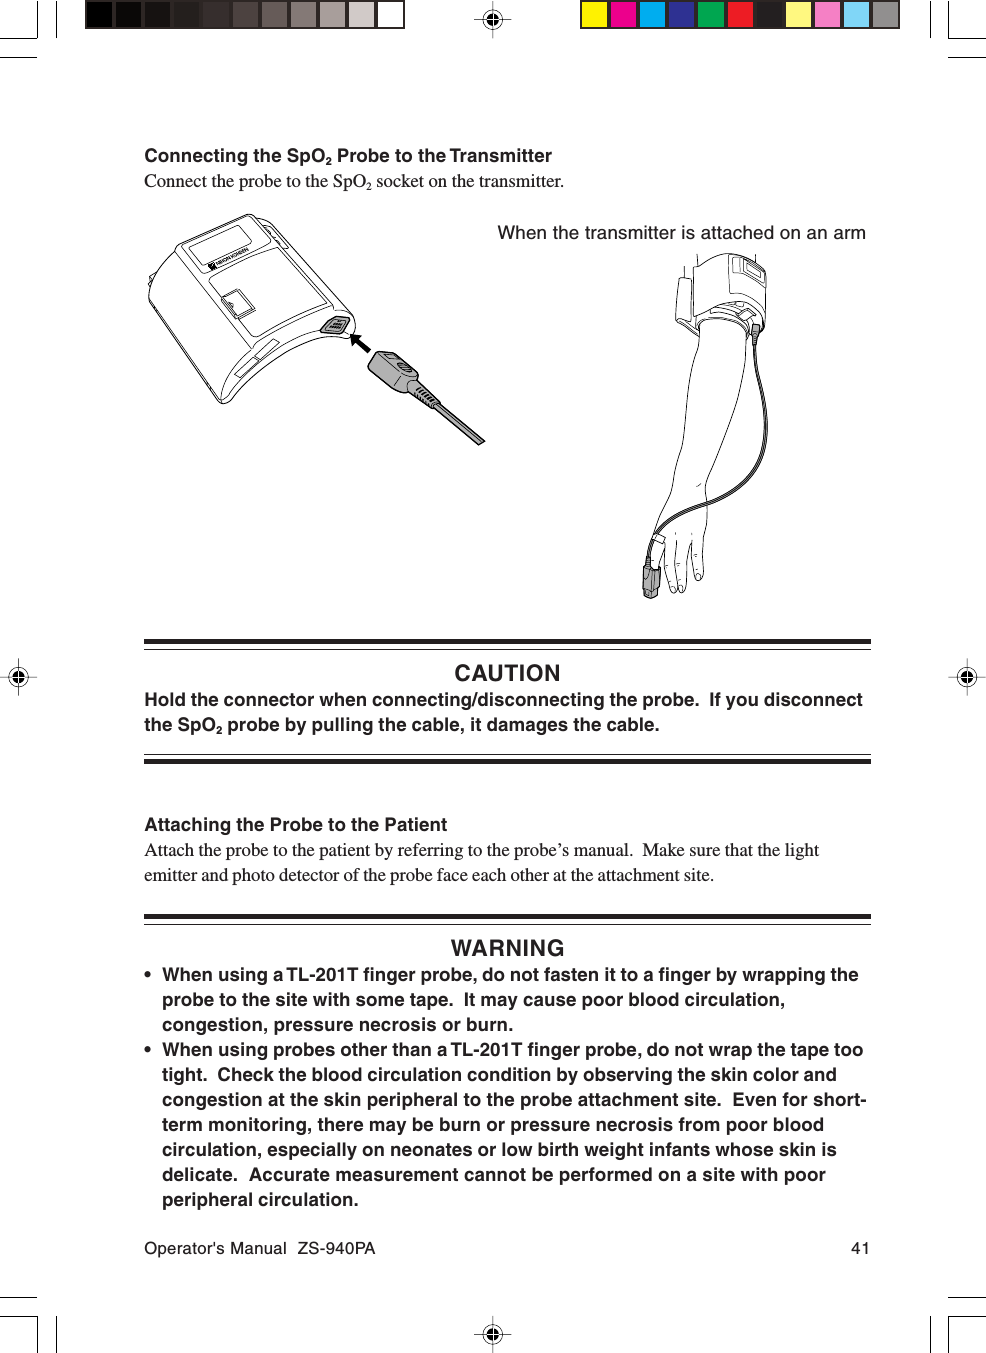 Operator&apos;s Manual  ZS-940PA 41CAUTIONHold the connector when connecting/disconnecting the probe.  If you disconnectthe SpO2 probe by pulling the cable, it damages the cable.Attaching the Probe to the PatientAttach the probe to the patient by referring to the probe’s manual.  Make sure that the lightemitter and photo detector of the probe face each other at the attachment site.WARNING• When using a TL-201T finger probe, do not fasten it to a finger by wrapping theprobe to the site with some tape.  It may cause poor blood circulation,congestion, pressure necrosis or burn.• When using probes other than a TL-201T finger probe, do not wrap the tape tootight.  Check the blood circulation condition by observing the skin color andcongestion at the skin peripheral to the probe attachment site.  Even for short-term monitoring, there may be burn or pressure necrosis from poor bloodcirculation, especially on neonates or low birth weight infants whose skin isdelicate.  Accurate measurement cannot be performed on a site with poorperipheral circulation.Connecting the SpO2 Probe to the TransmitterConnect the probe to the SpO2 socket on the transmitter.When the transmitter is attached on an arm